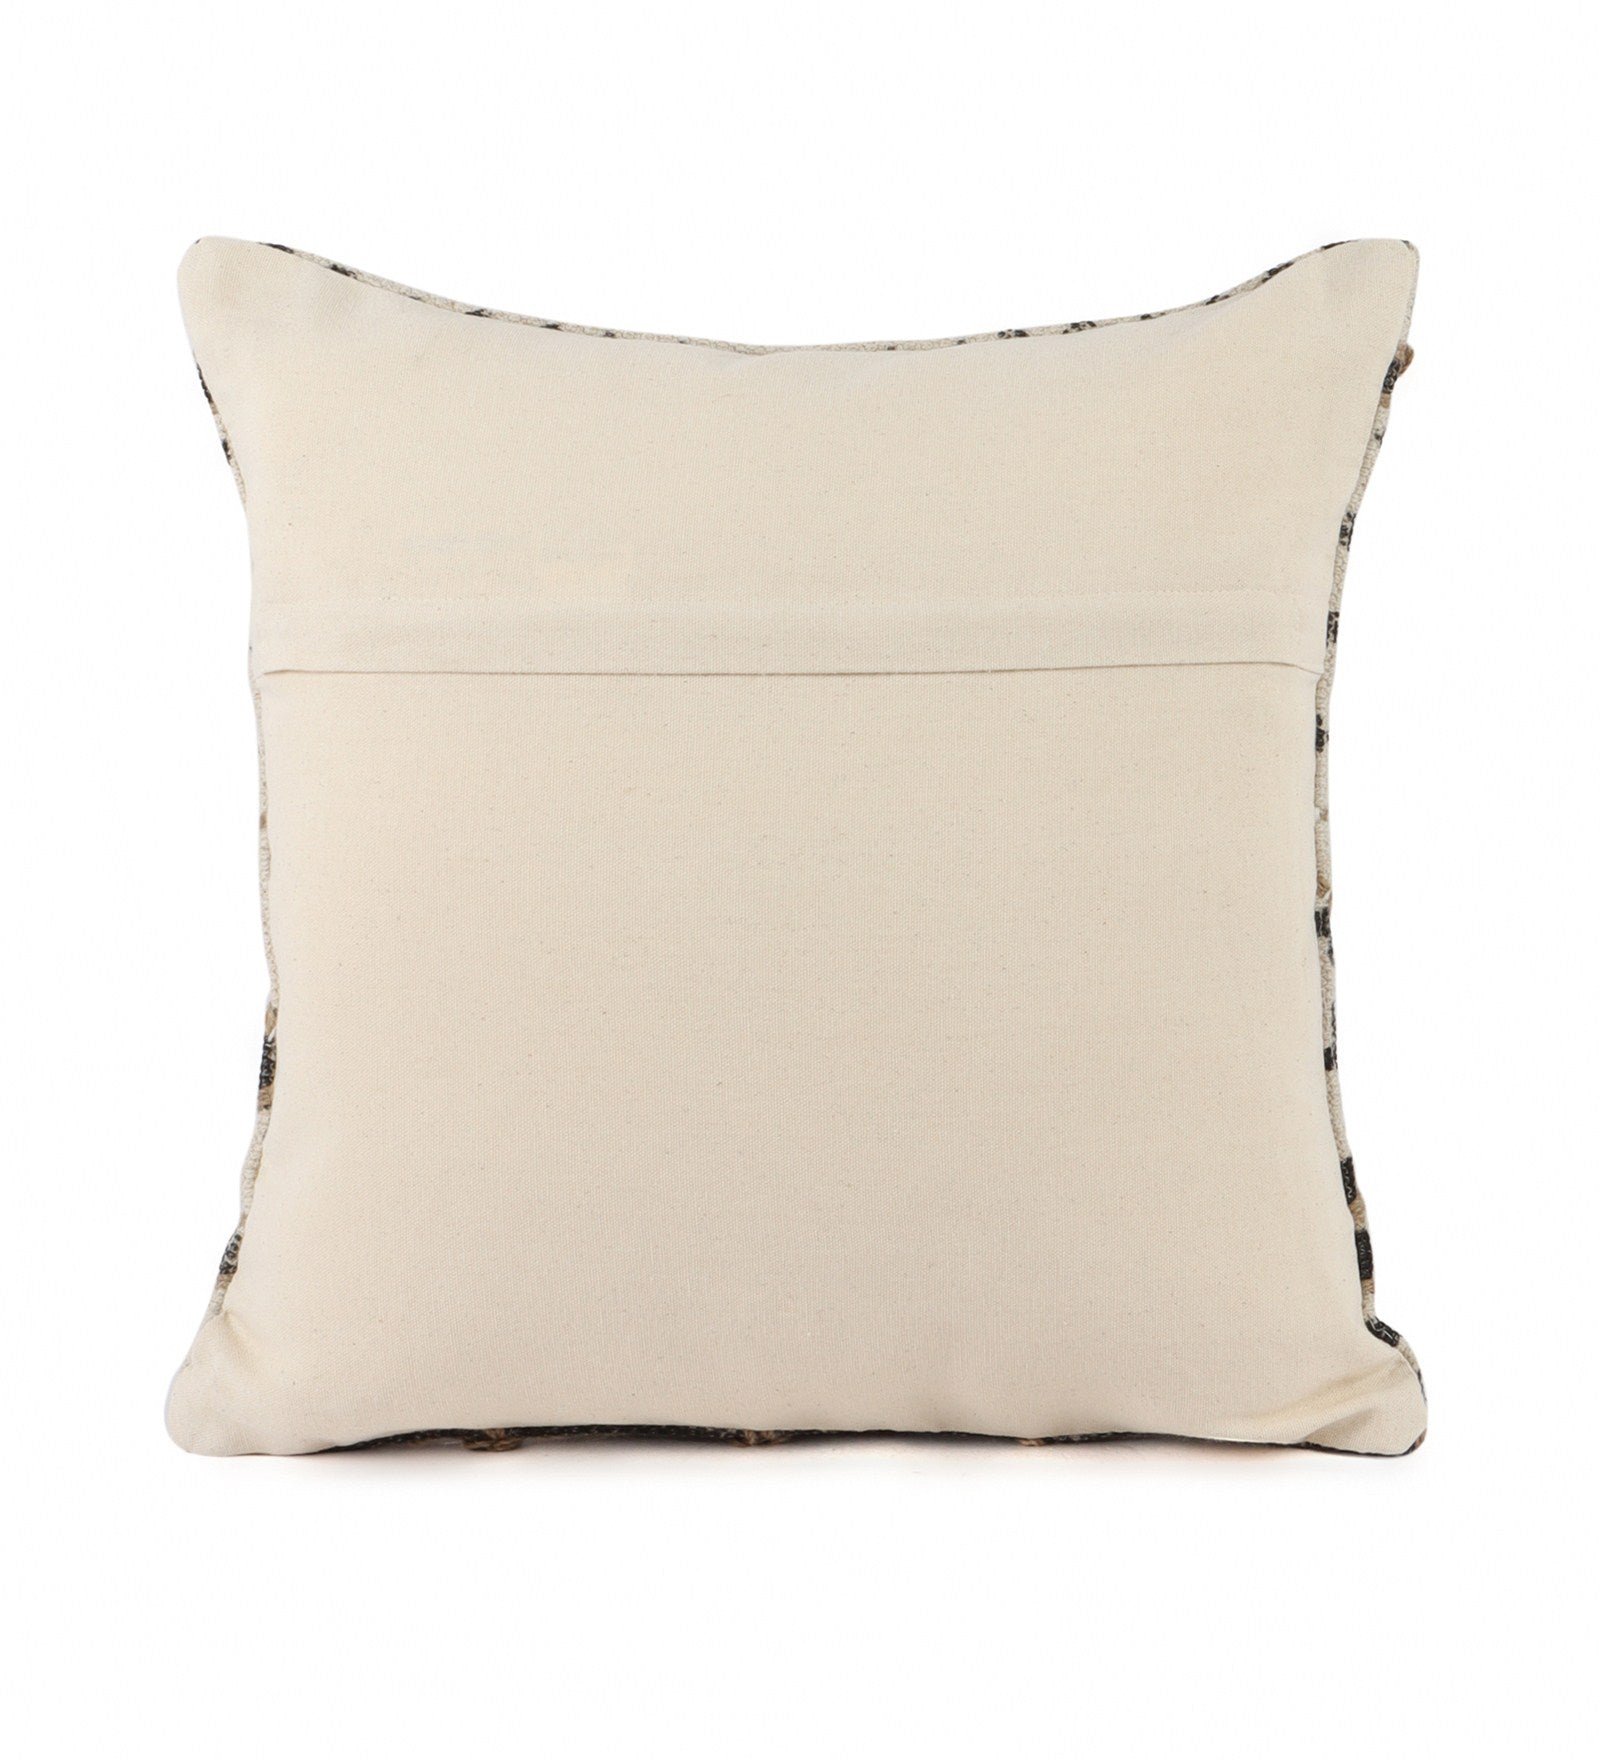 Embroidered Contemporary Cushion Cover (Blue Panel)